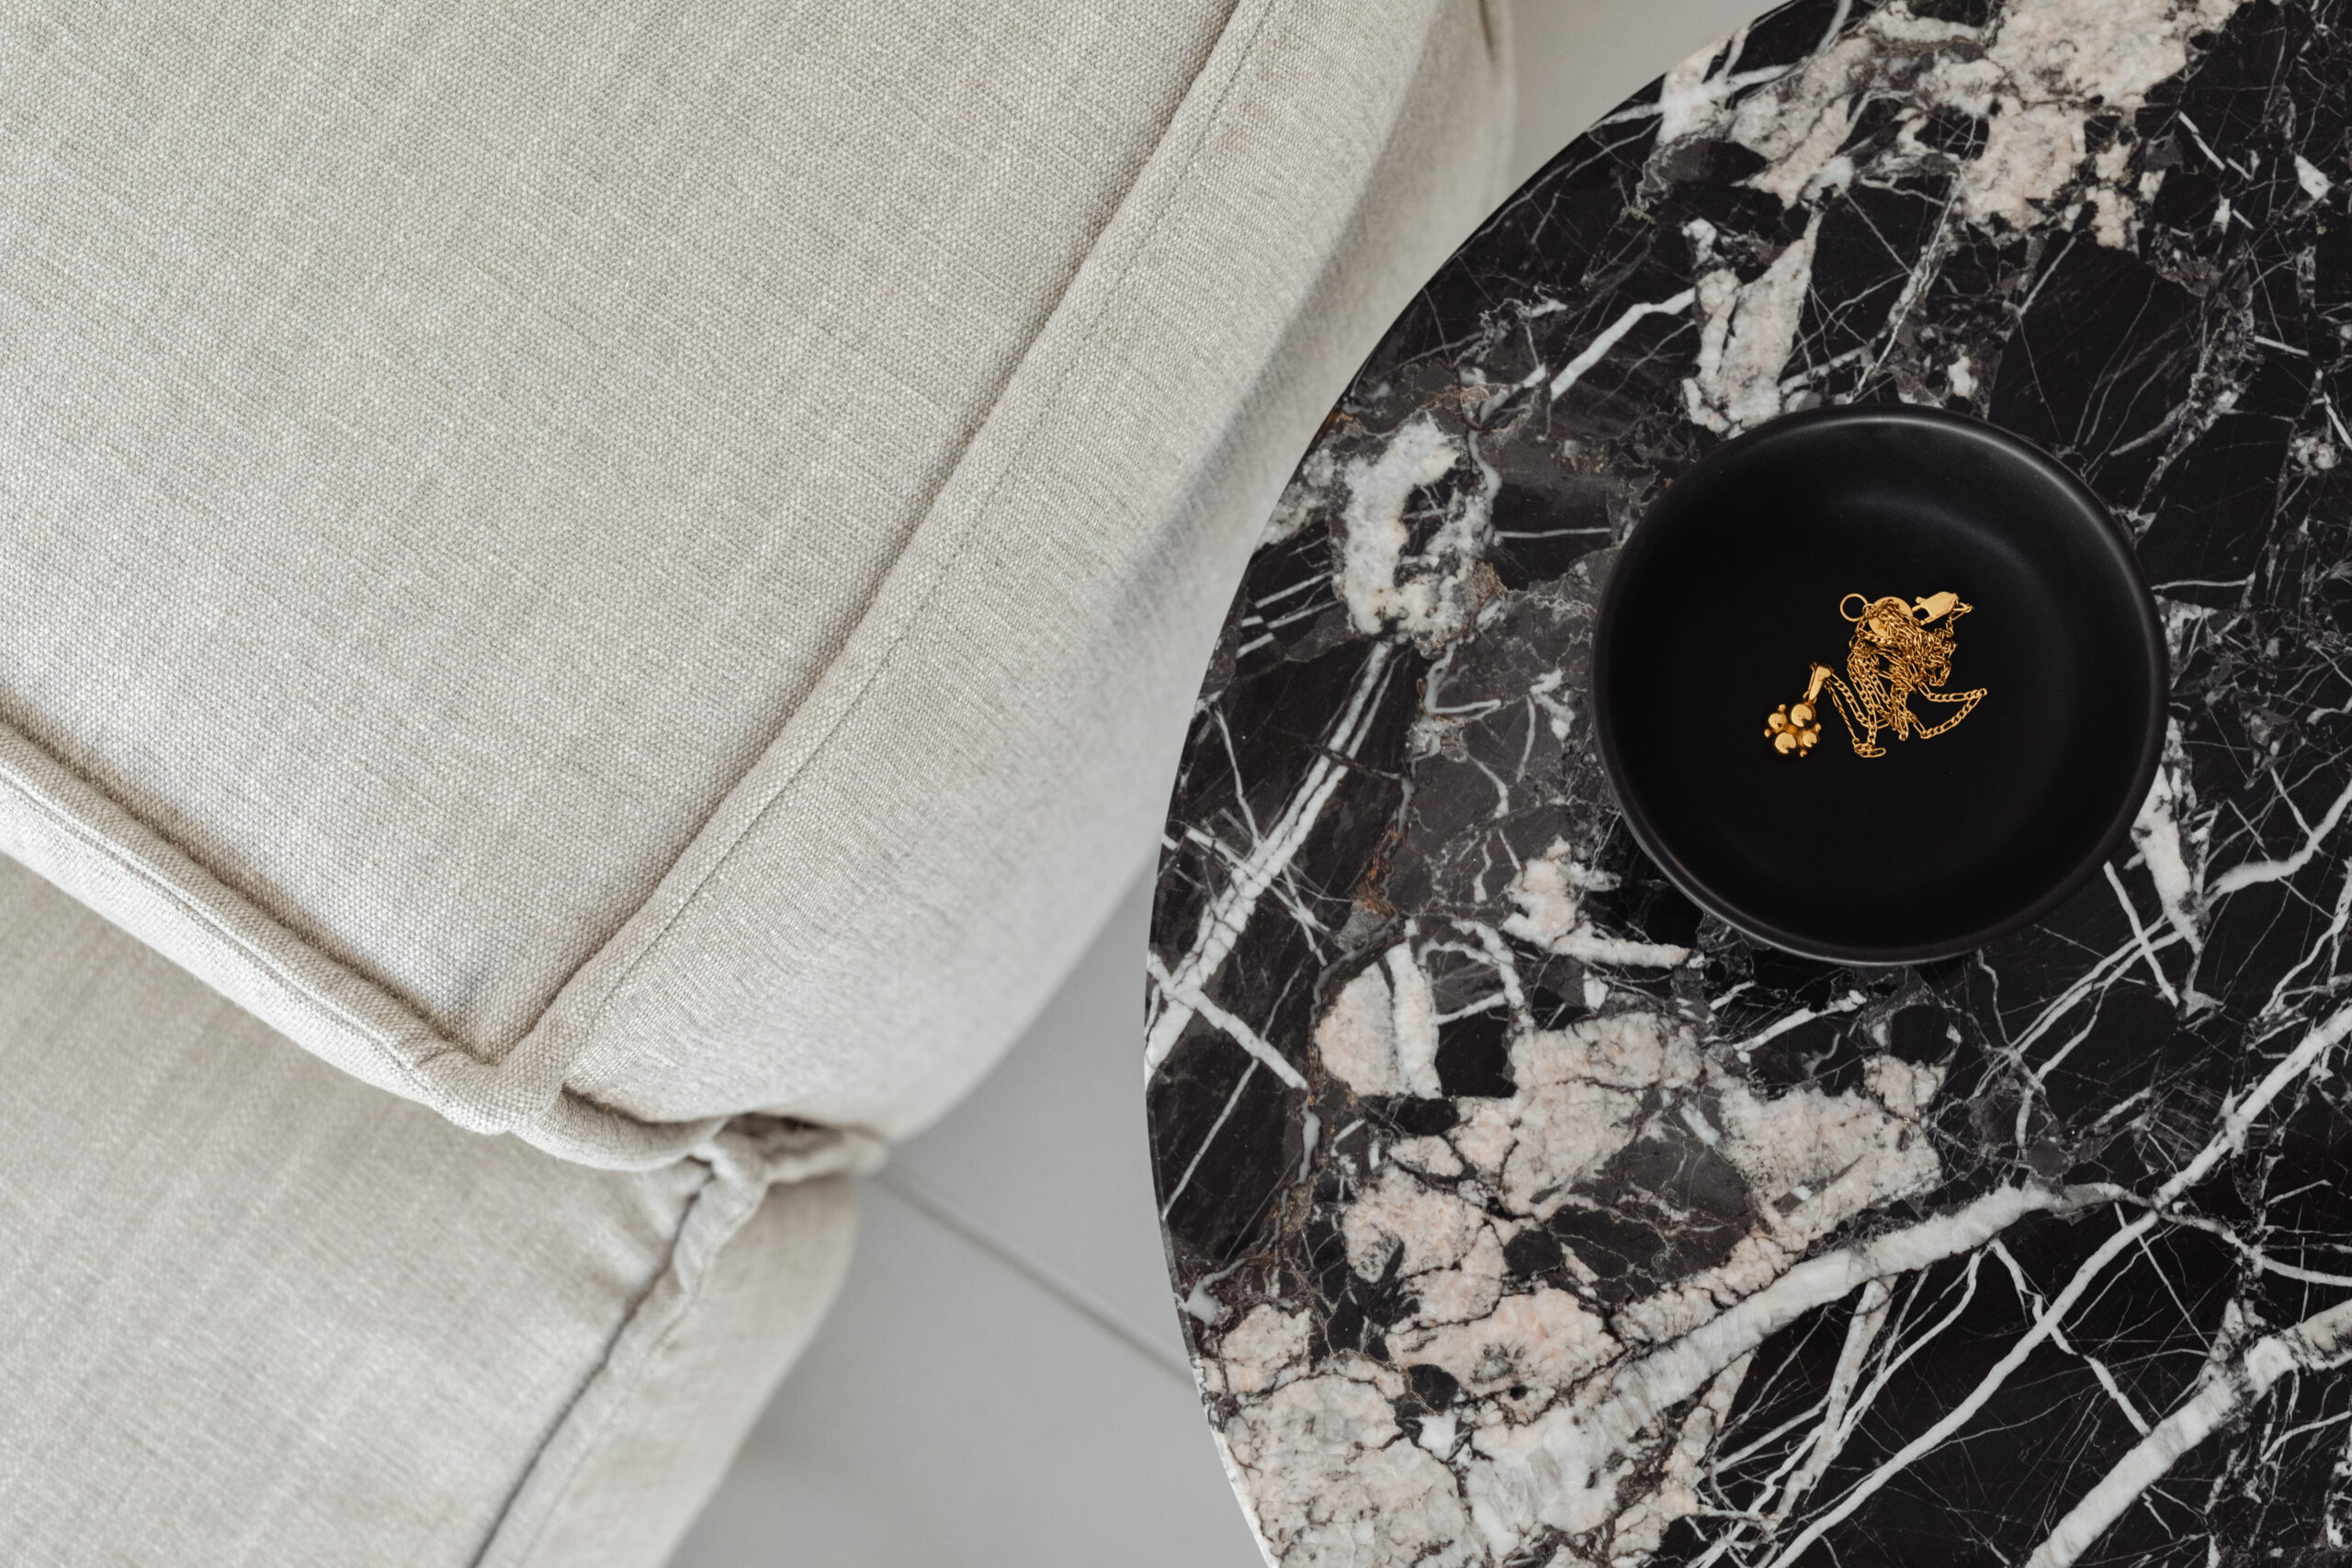 kaboompics_marble-side-table-round-greige-linen-sofa-cement-floor-jewelry-gold-chain-27219